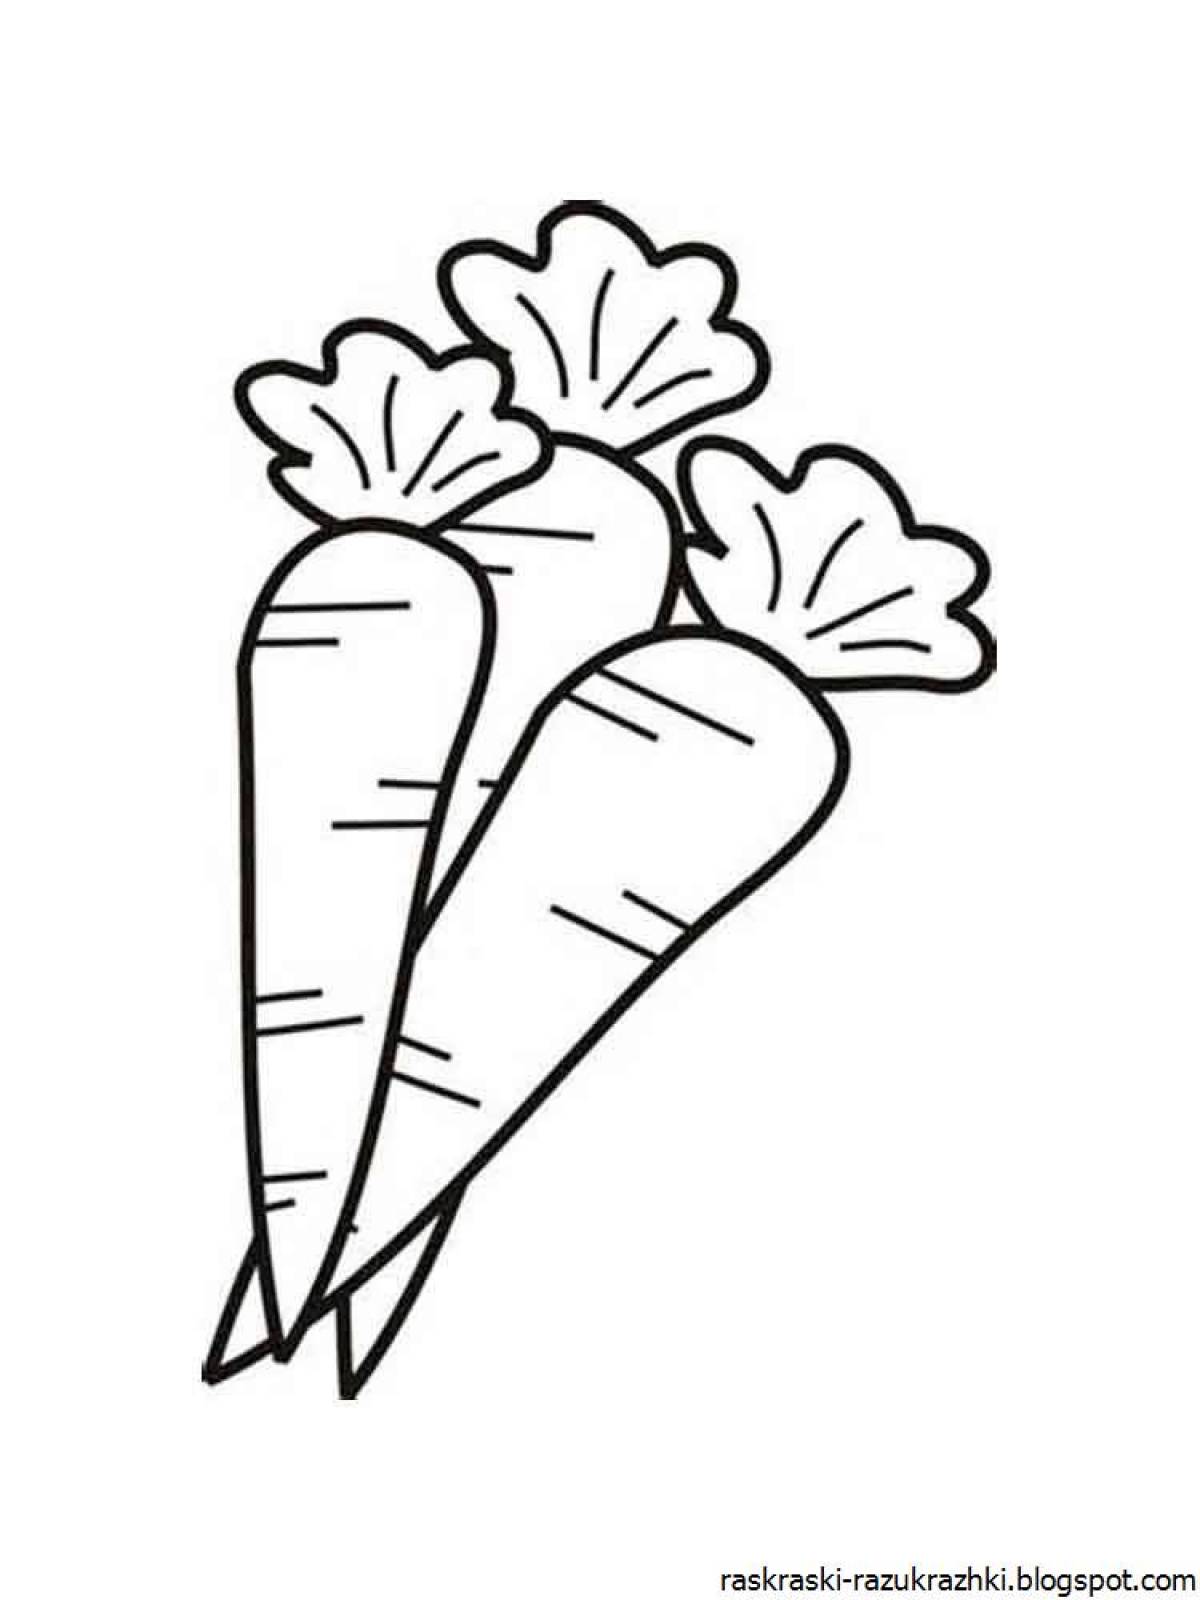 Colorful carrot coloring book for third graders